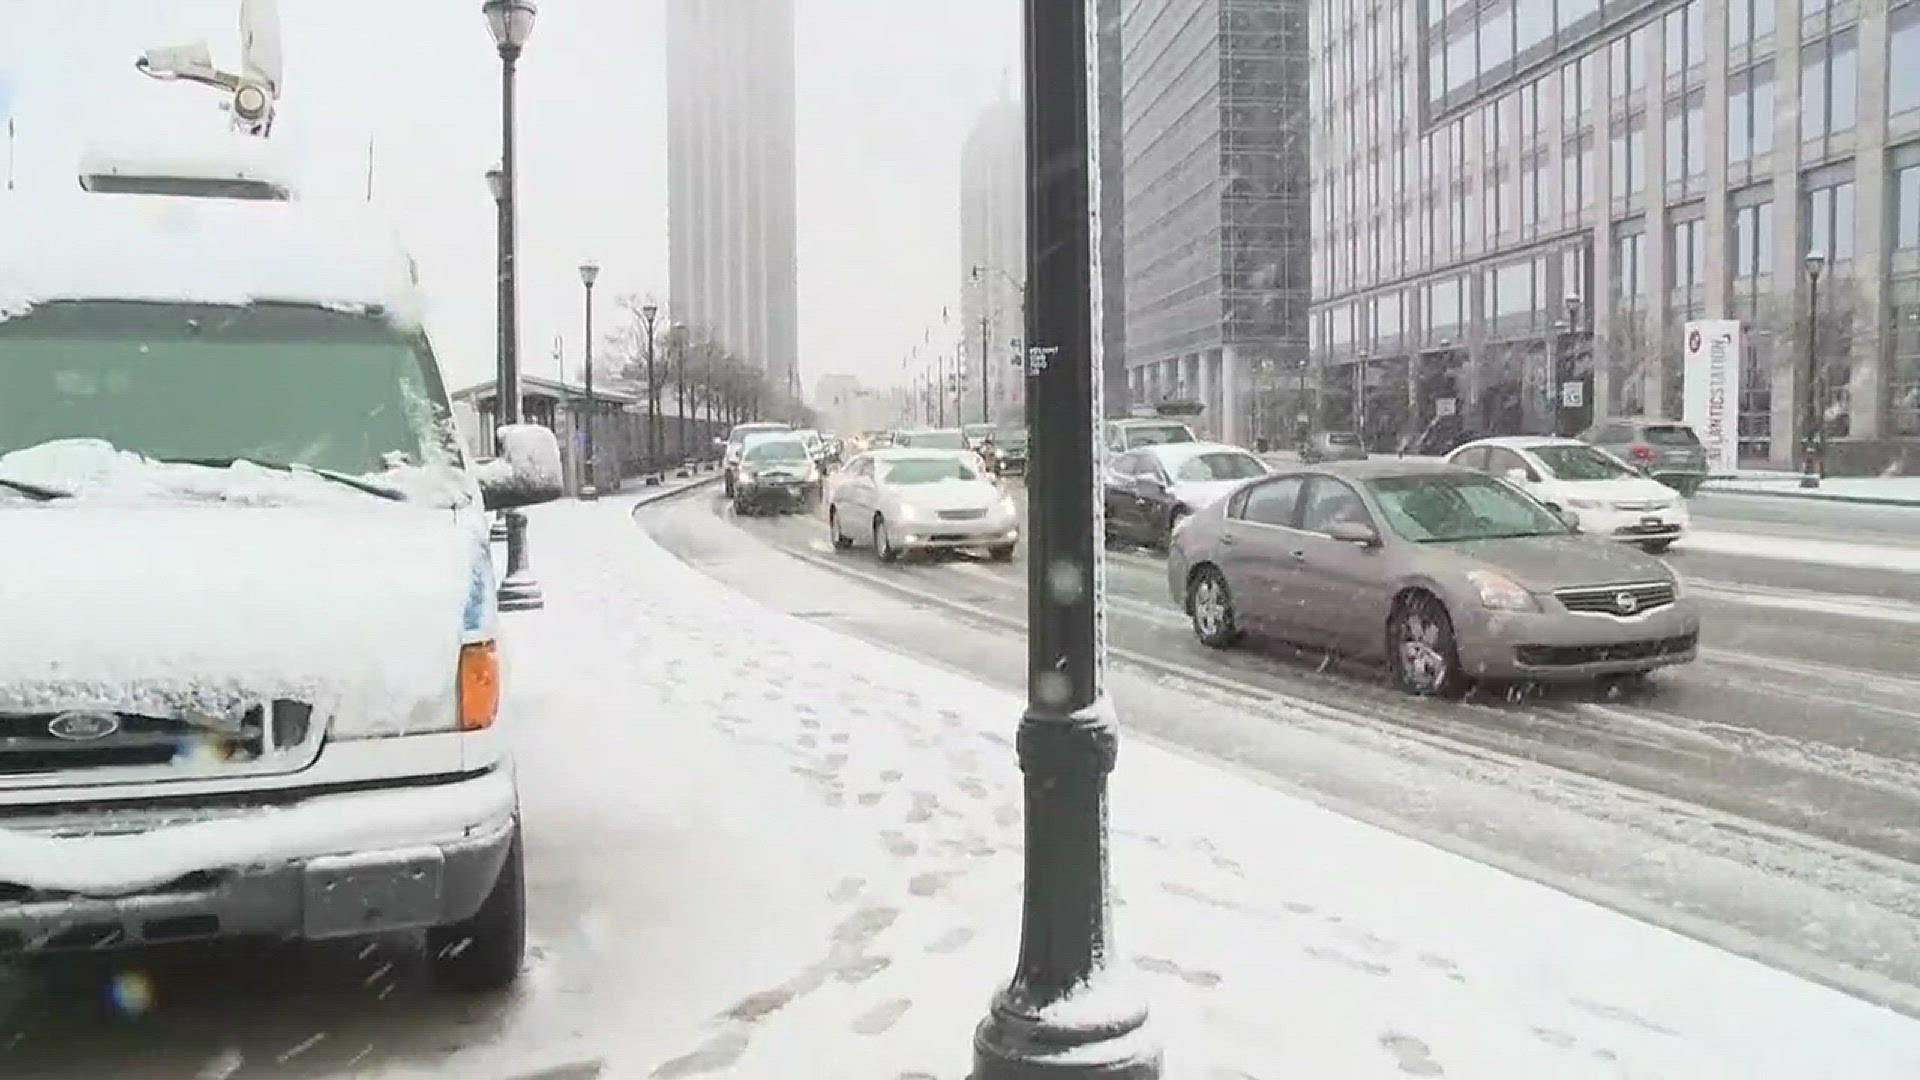 Schools are closing early in Atlanta as snow continues to fall. (WXIA)